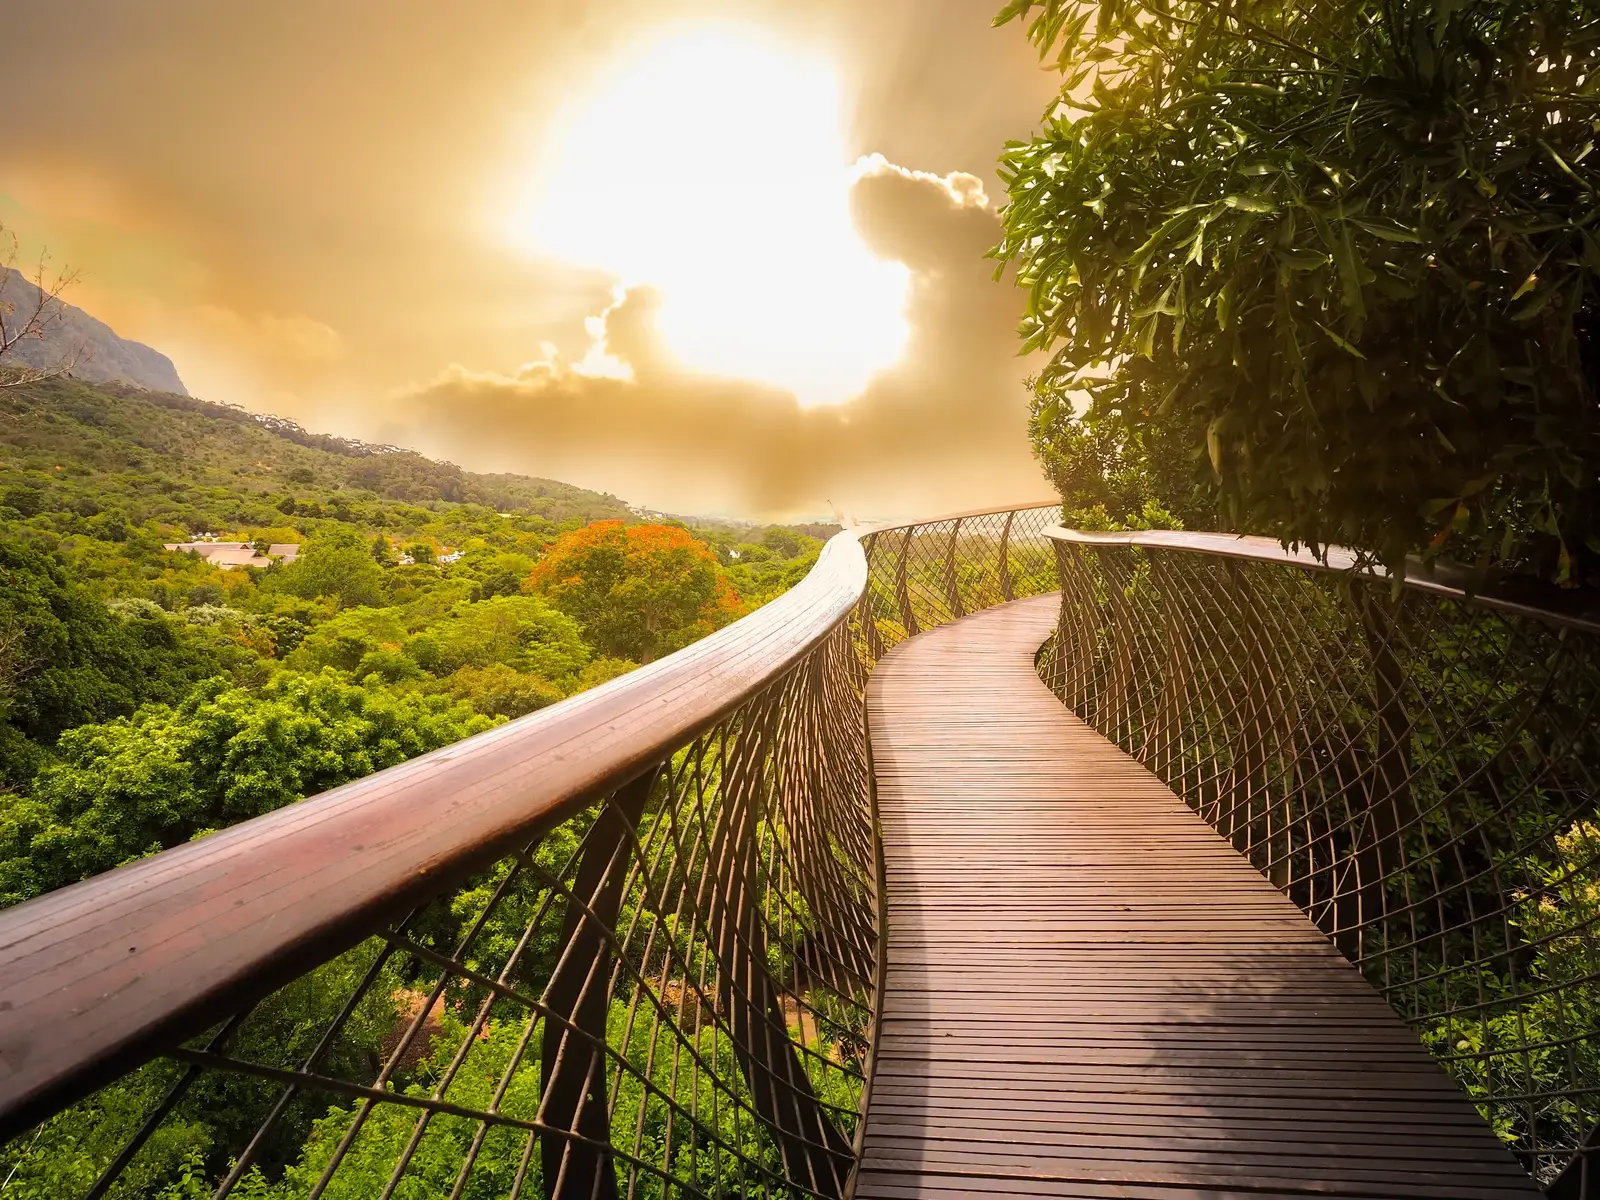 Tree canopy walkway with a wooden bridge in Kirstenbosch National Botanical Garden during the best time to visit South Africa